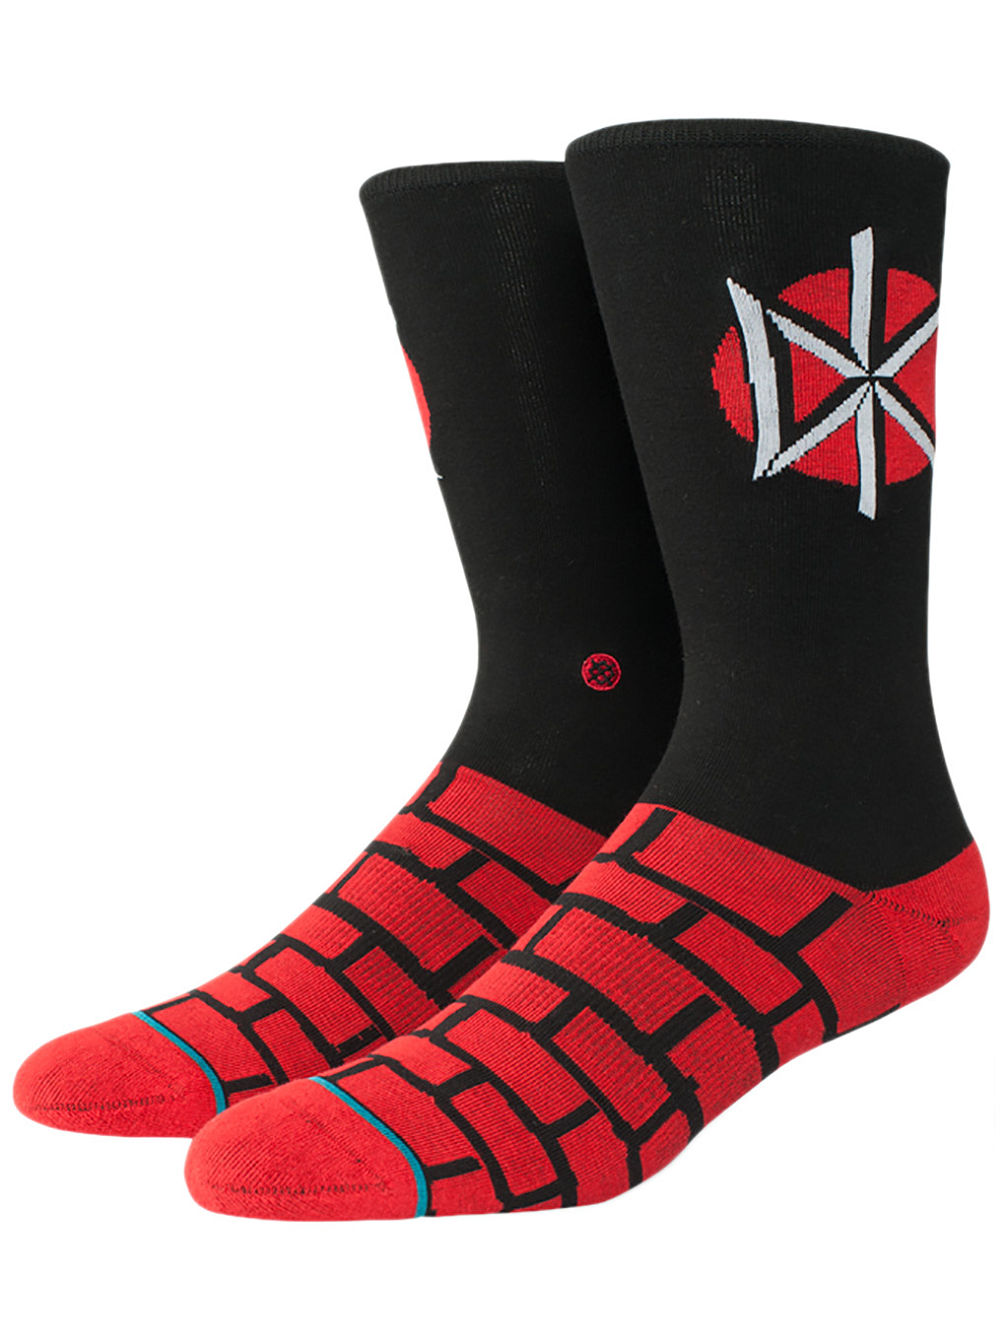 Dead Kennedys Chaussettes